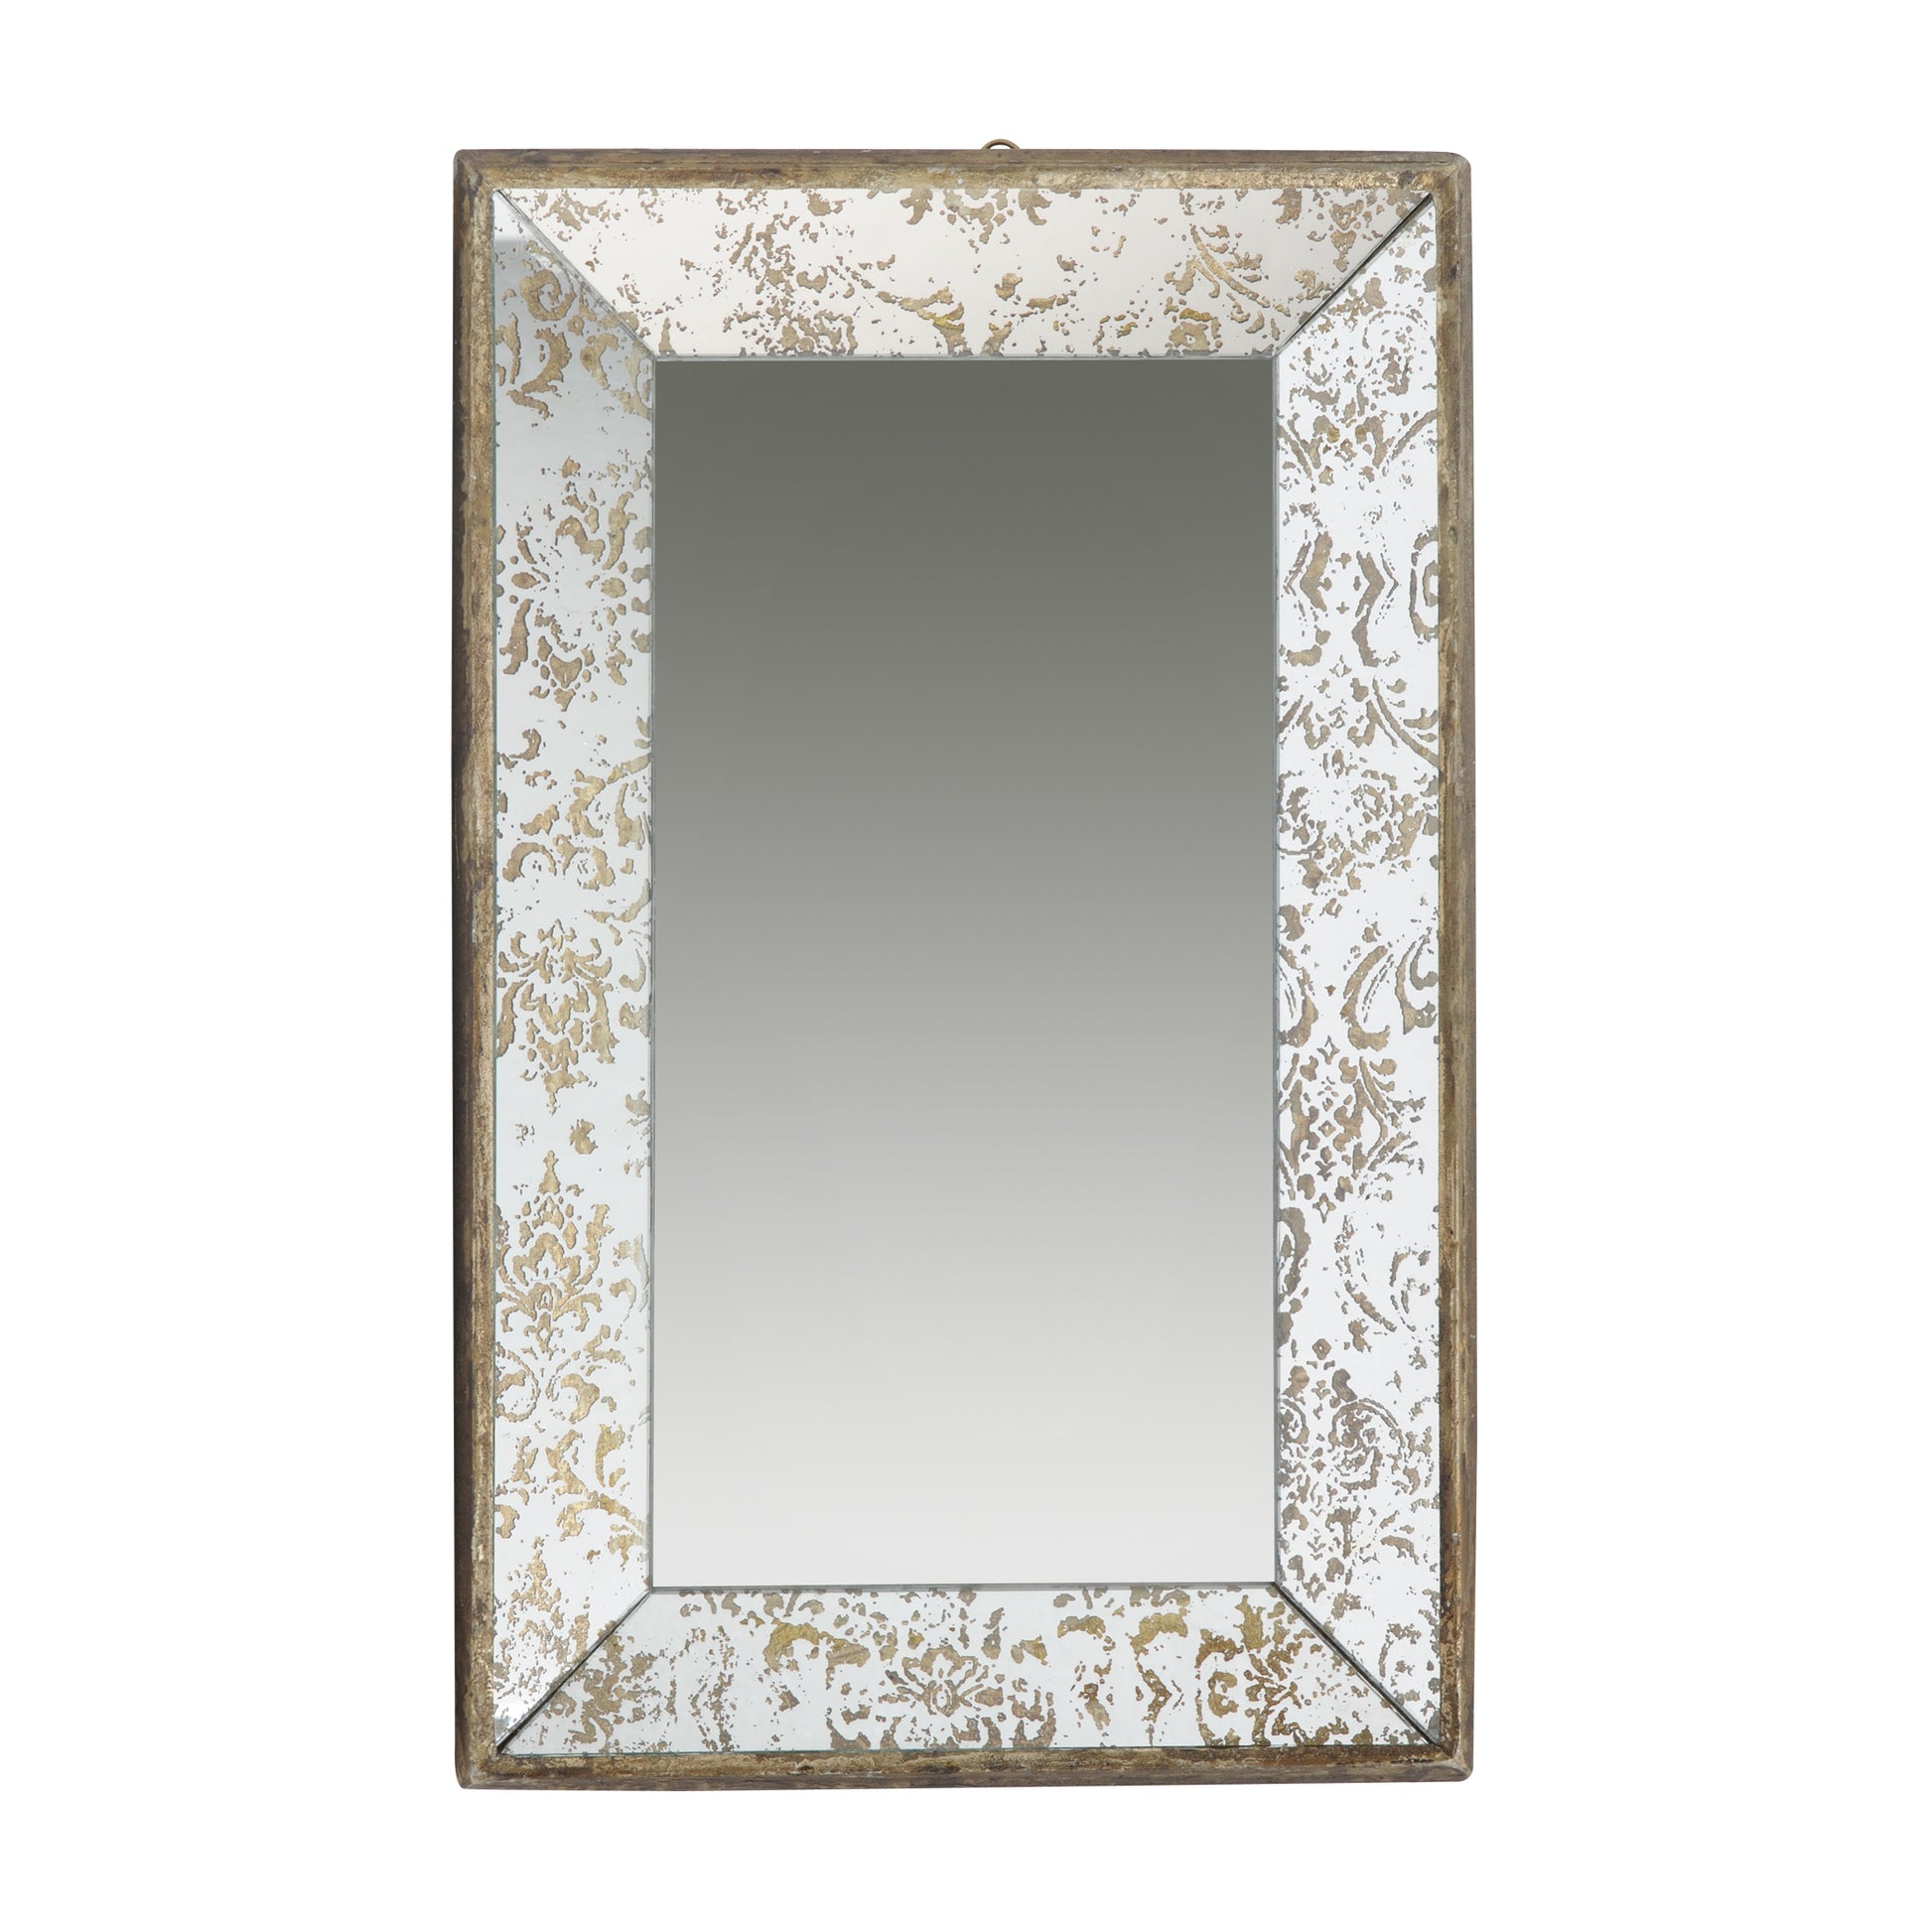 20" x 12" Antique Silver Rectangle Mirror with Floral silver-mdf+glass